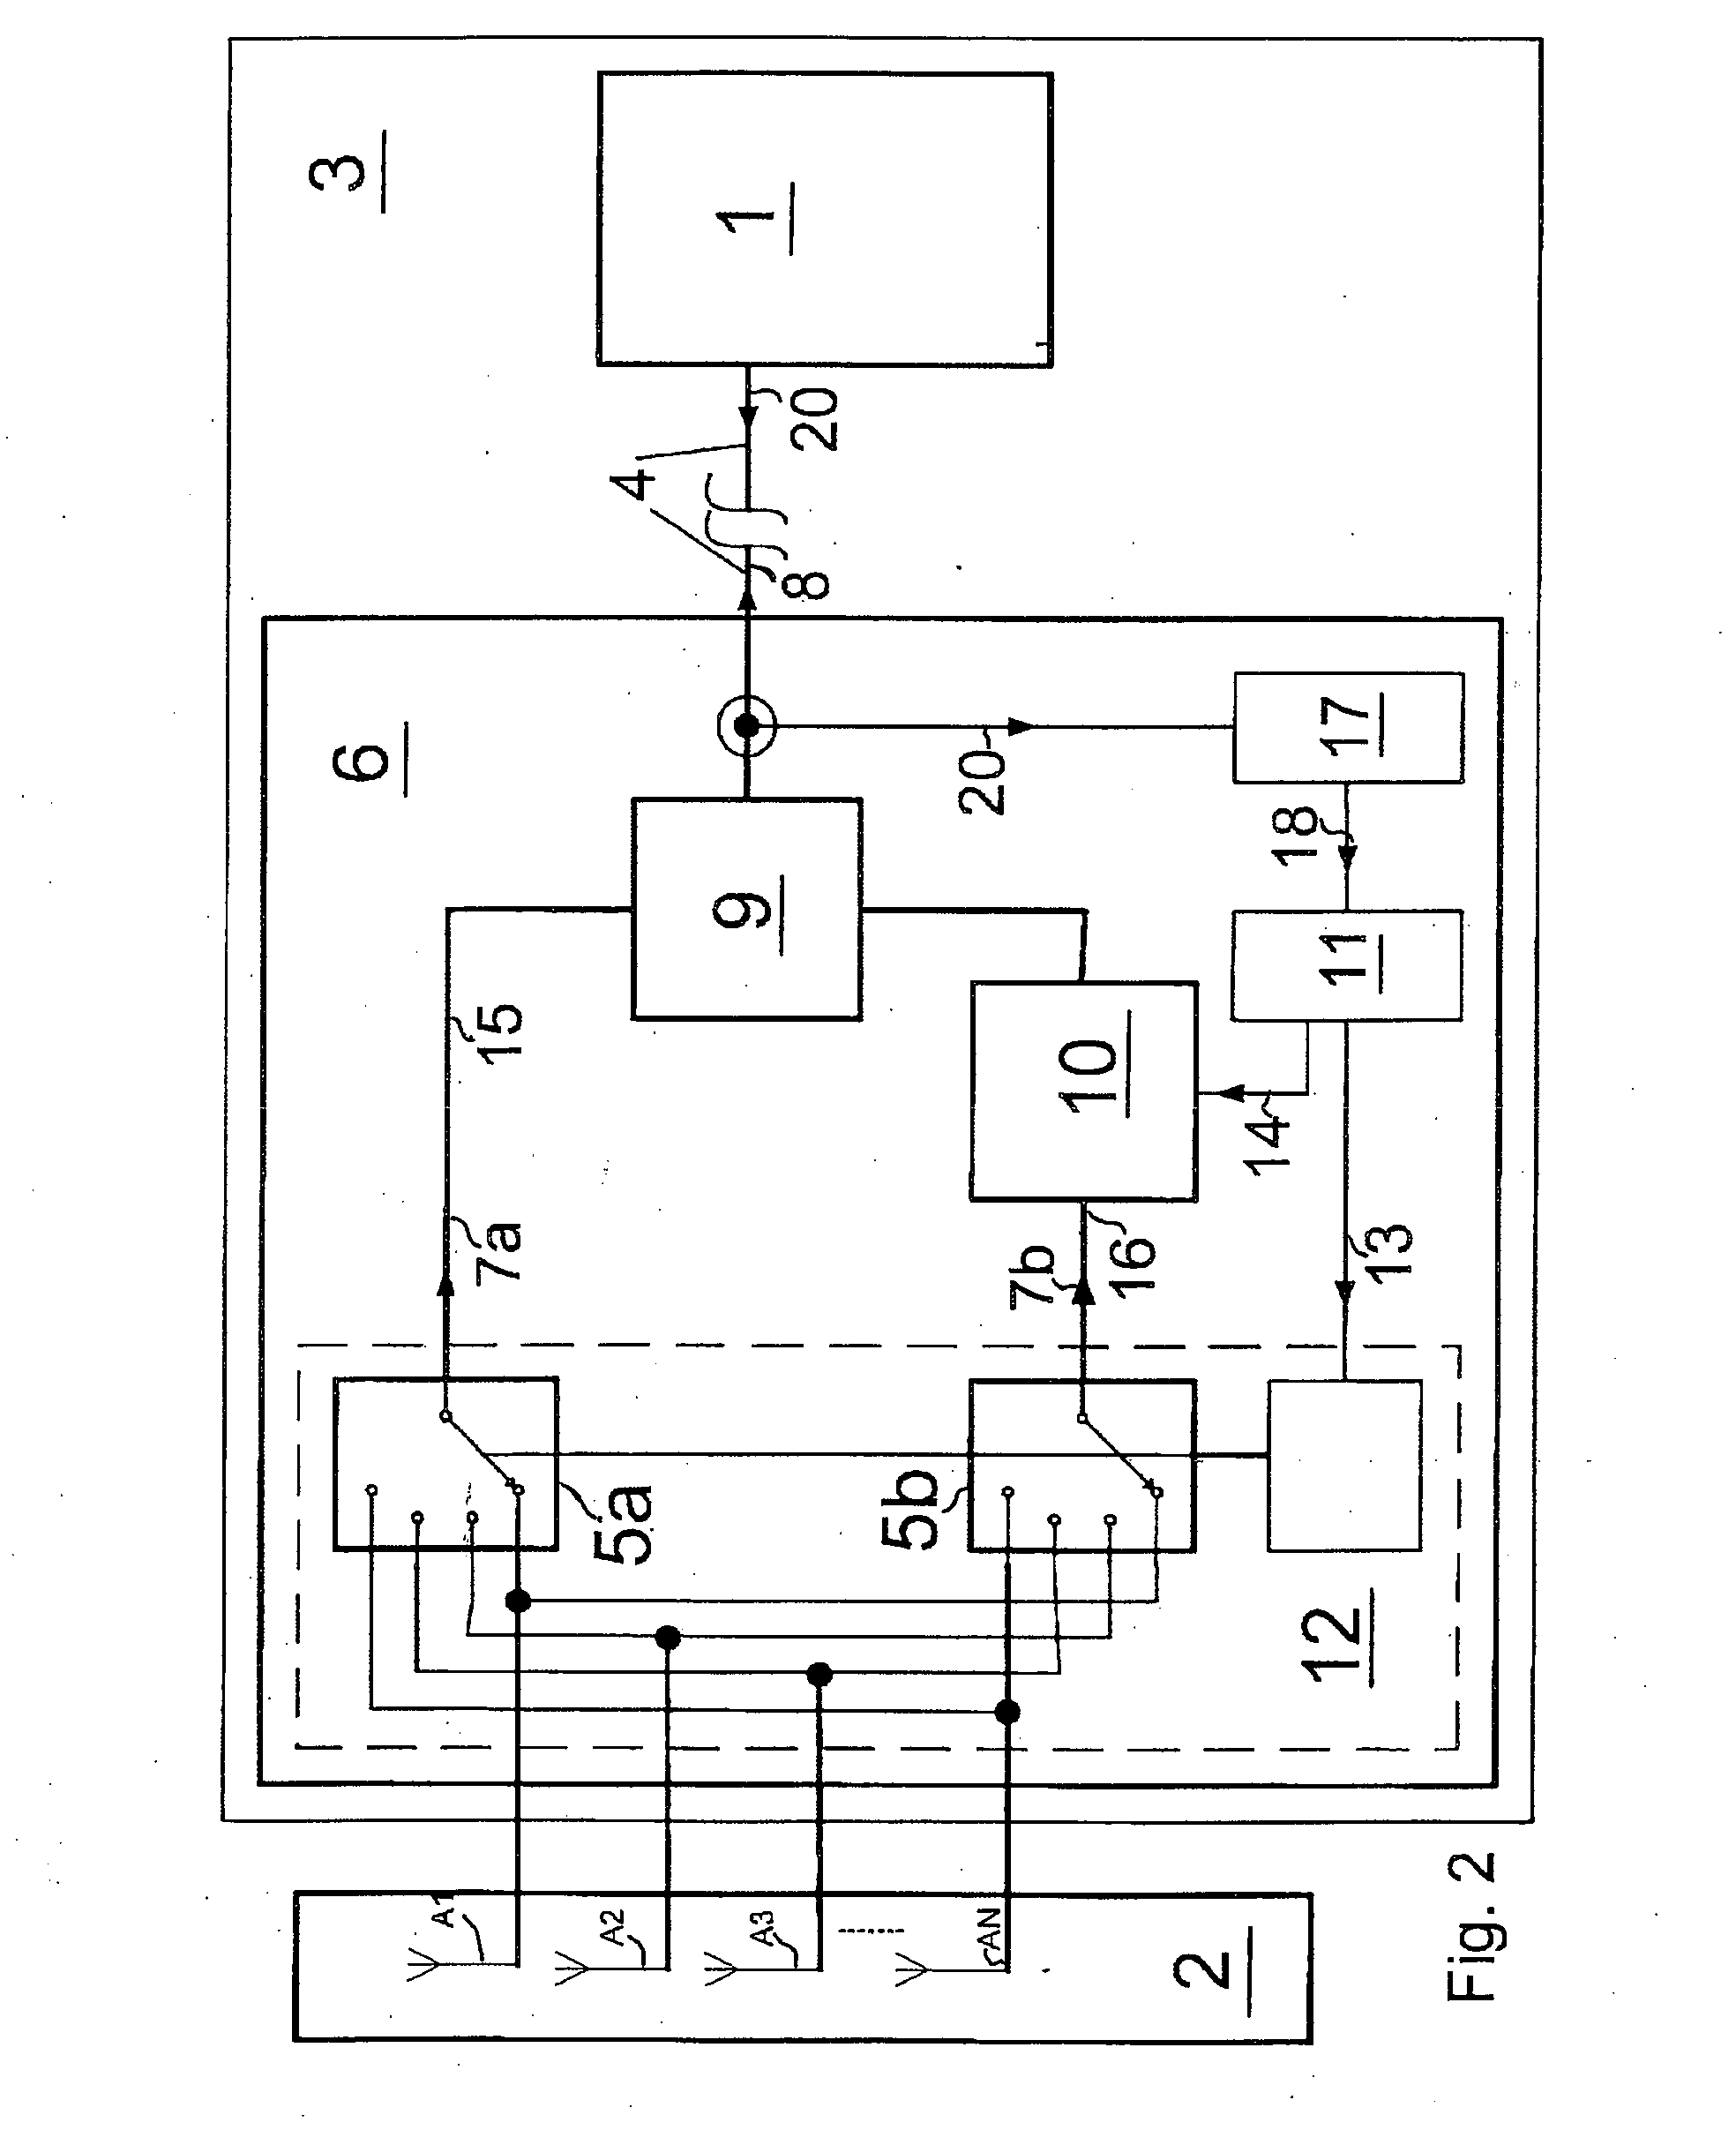 Antenna diversity system for radio reception for motor vehicles